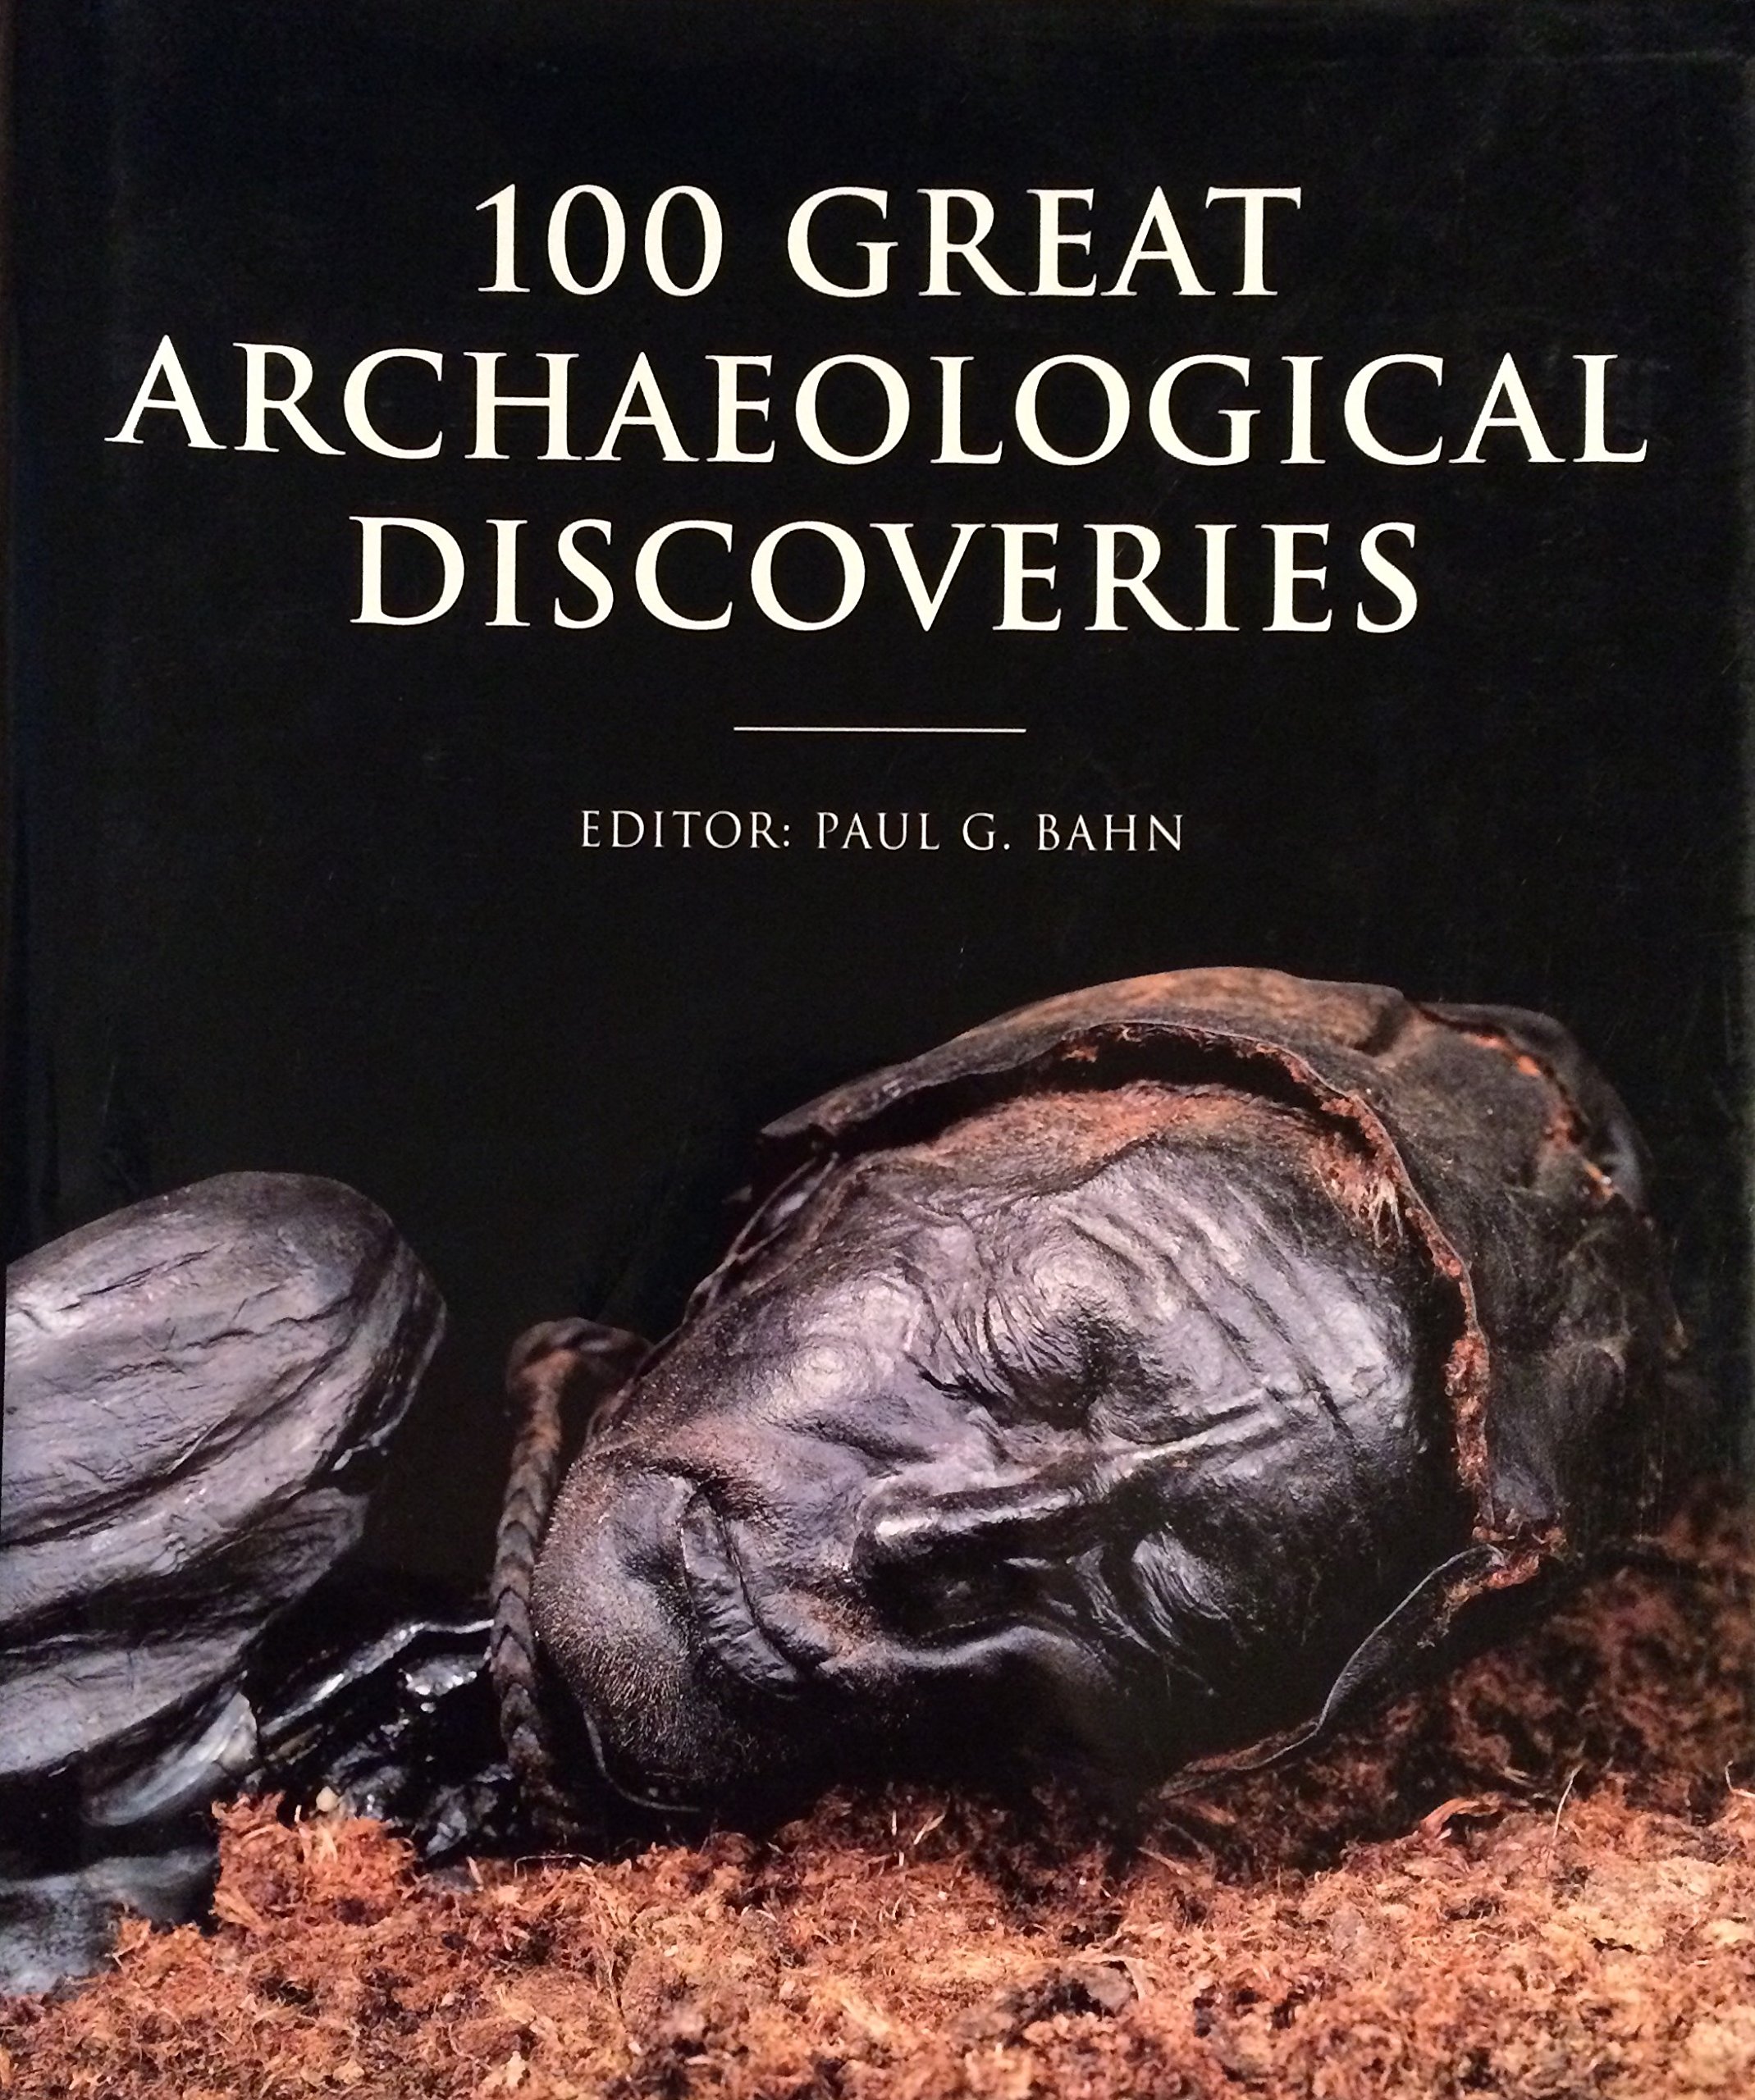 A picture of Archeology textbook